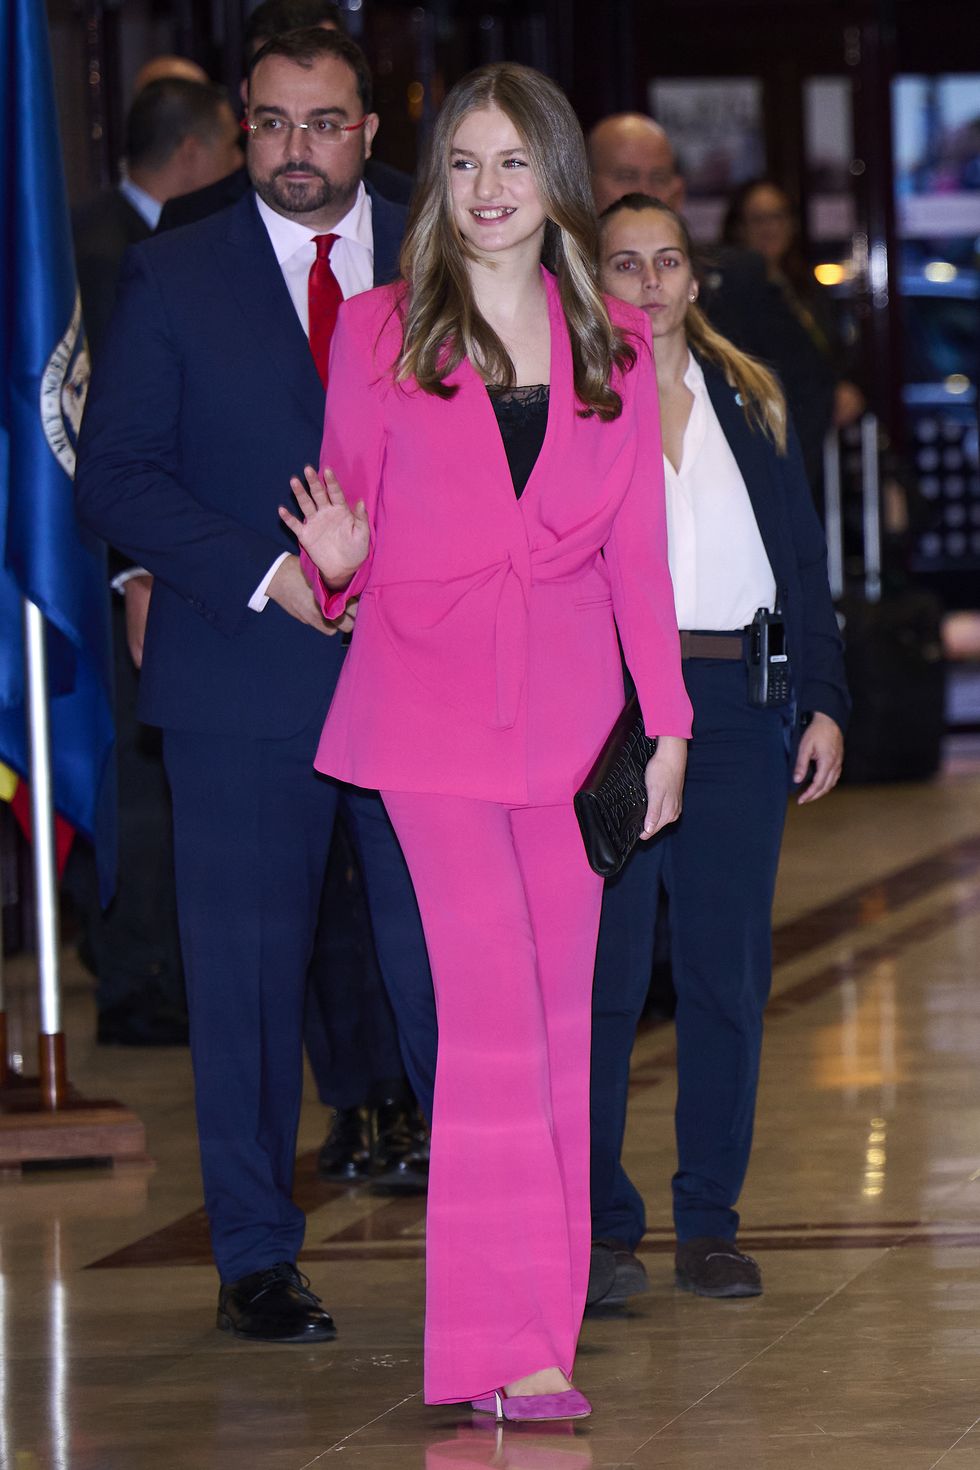 oviedo, spain october 27 crown princess leonor of spain attends a concert ahead of the princesa de asturias awards 2022 at the prince felipe auditorium on october 27, 2022 in oviedo, spain photo by carlos alvarezgetty images